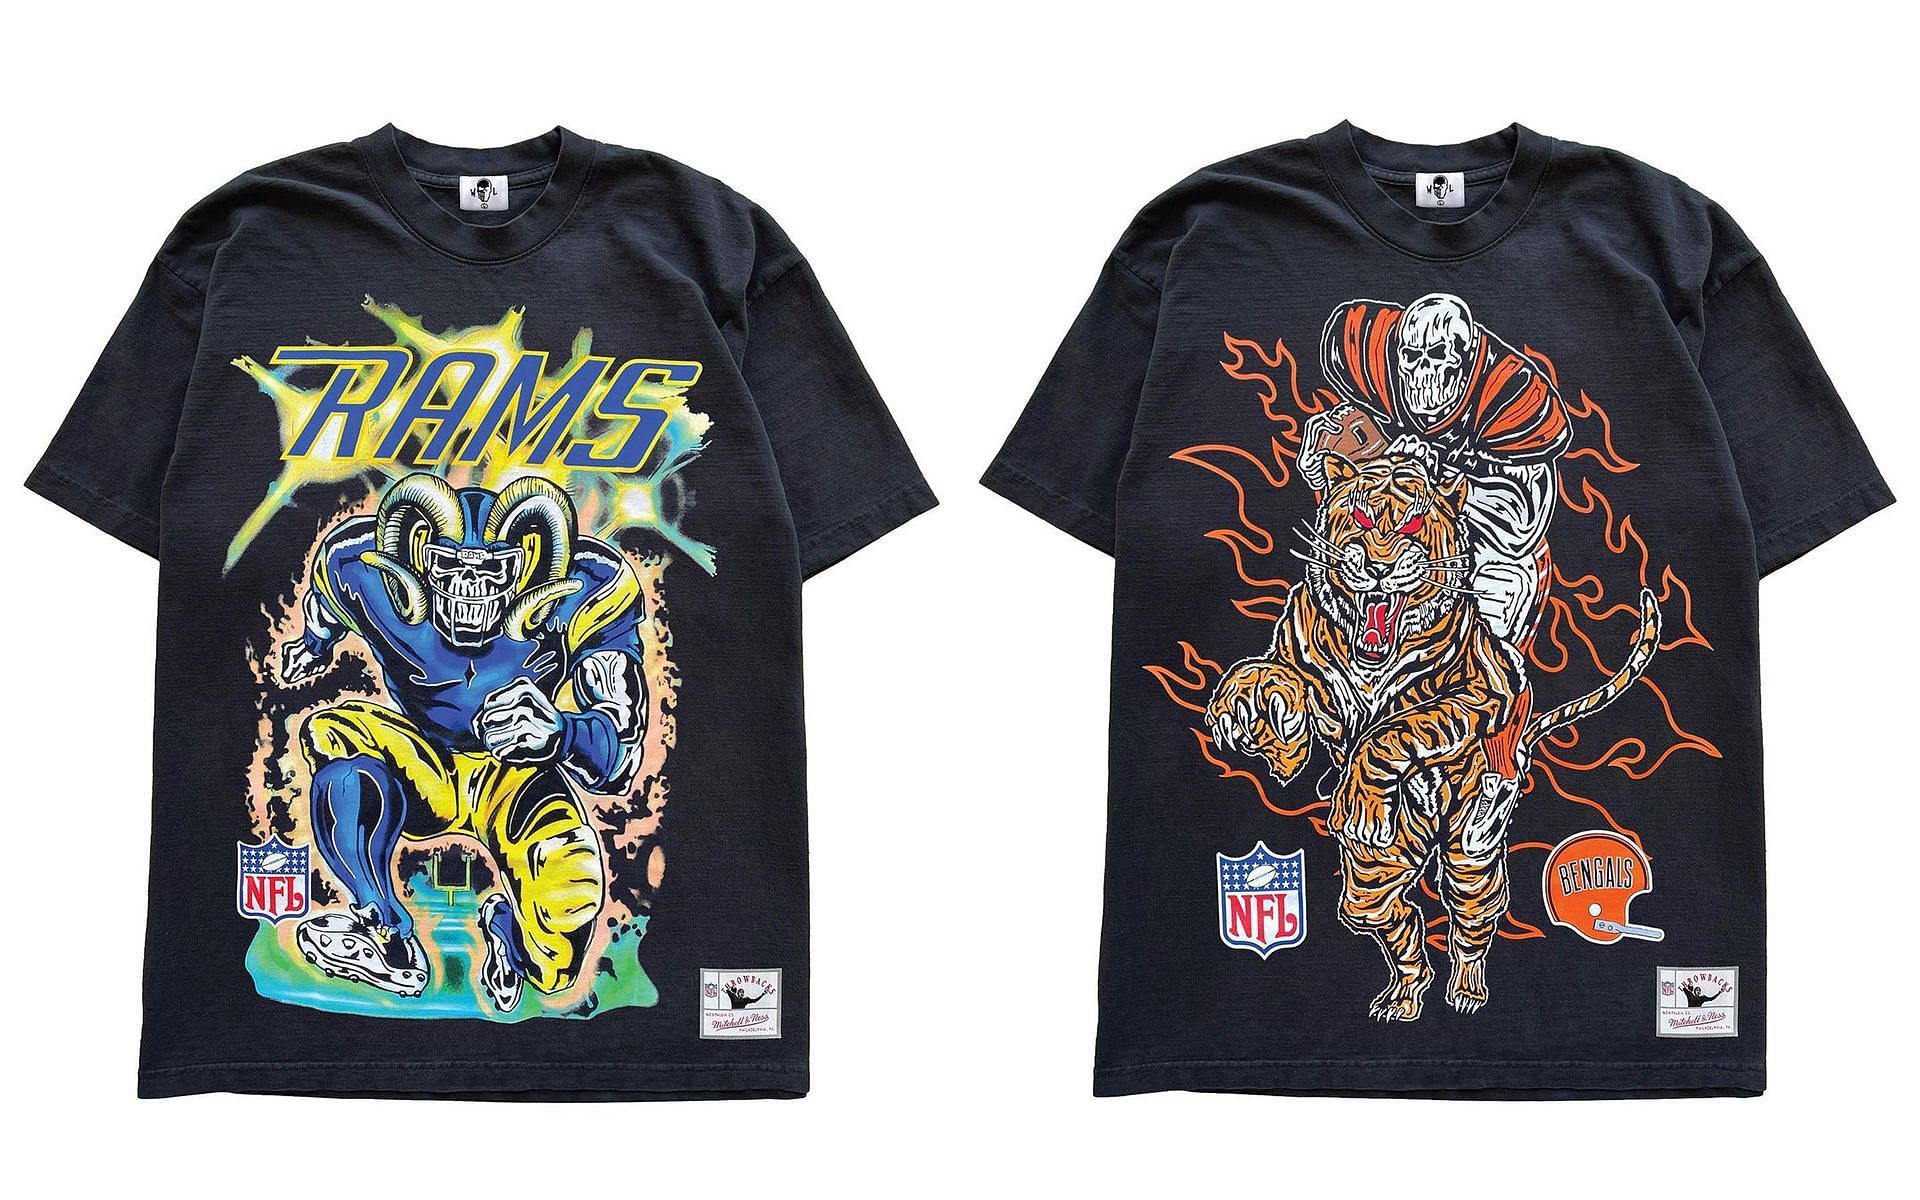 The Warren Lotas x NFL x Mitchell & Ness collection: Where to buy, price  and more details explored